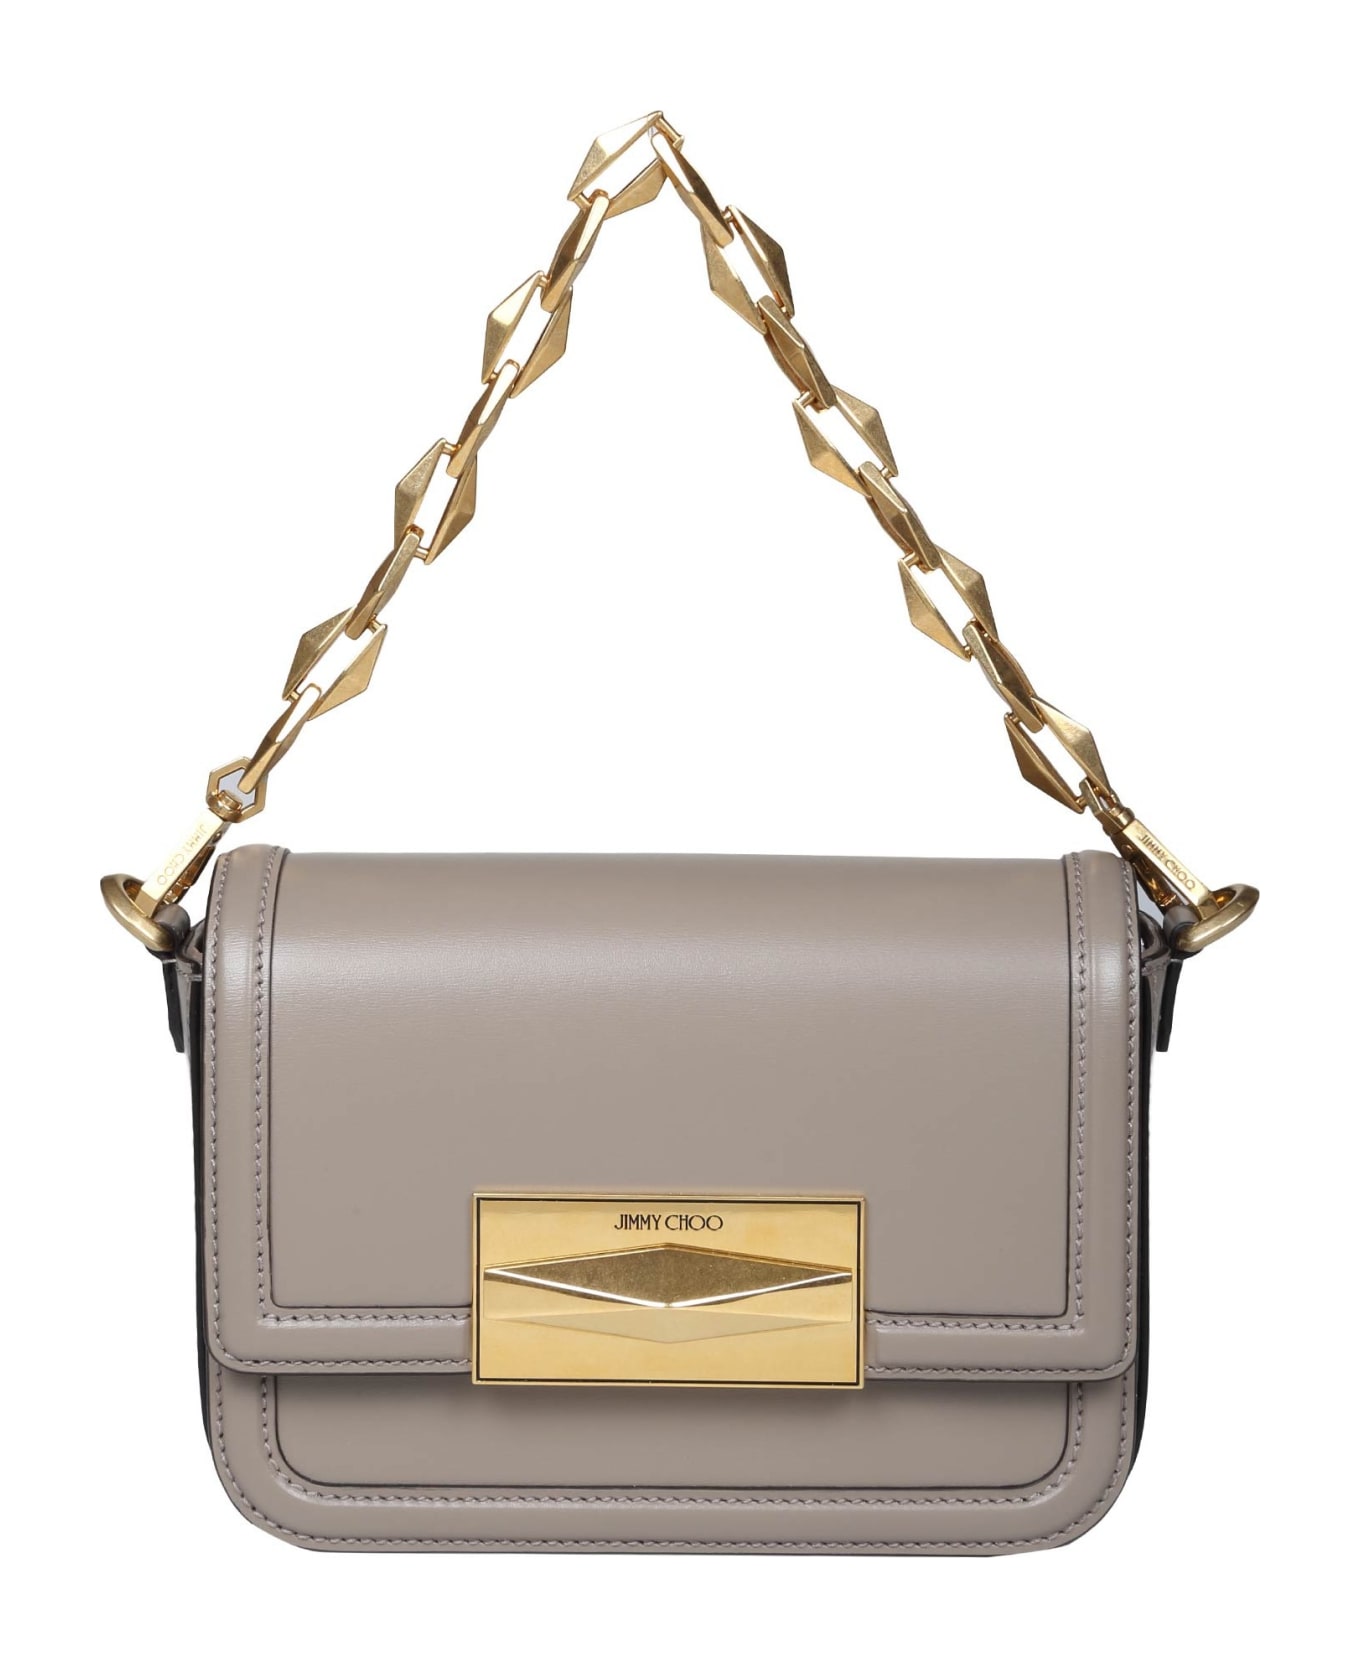 Jimmy Choo Diamond Crossbody Bag In Taupe Color Leather - Taupe